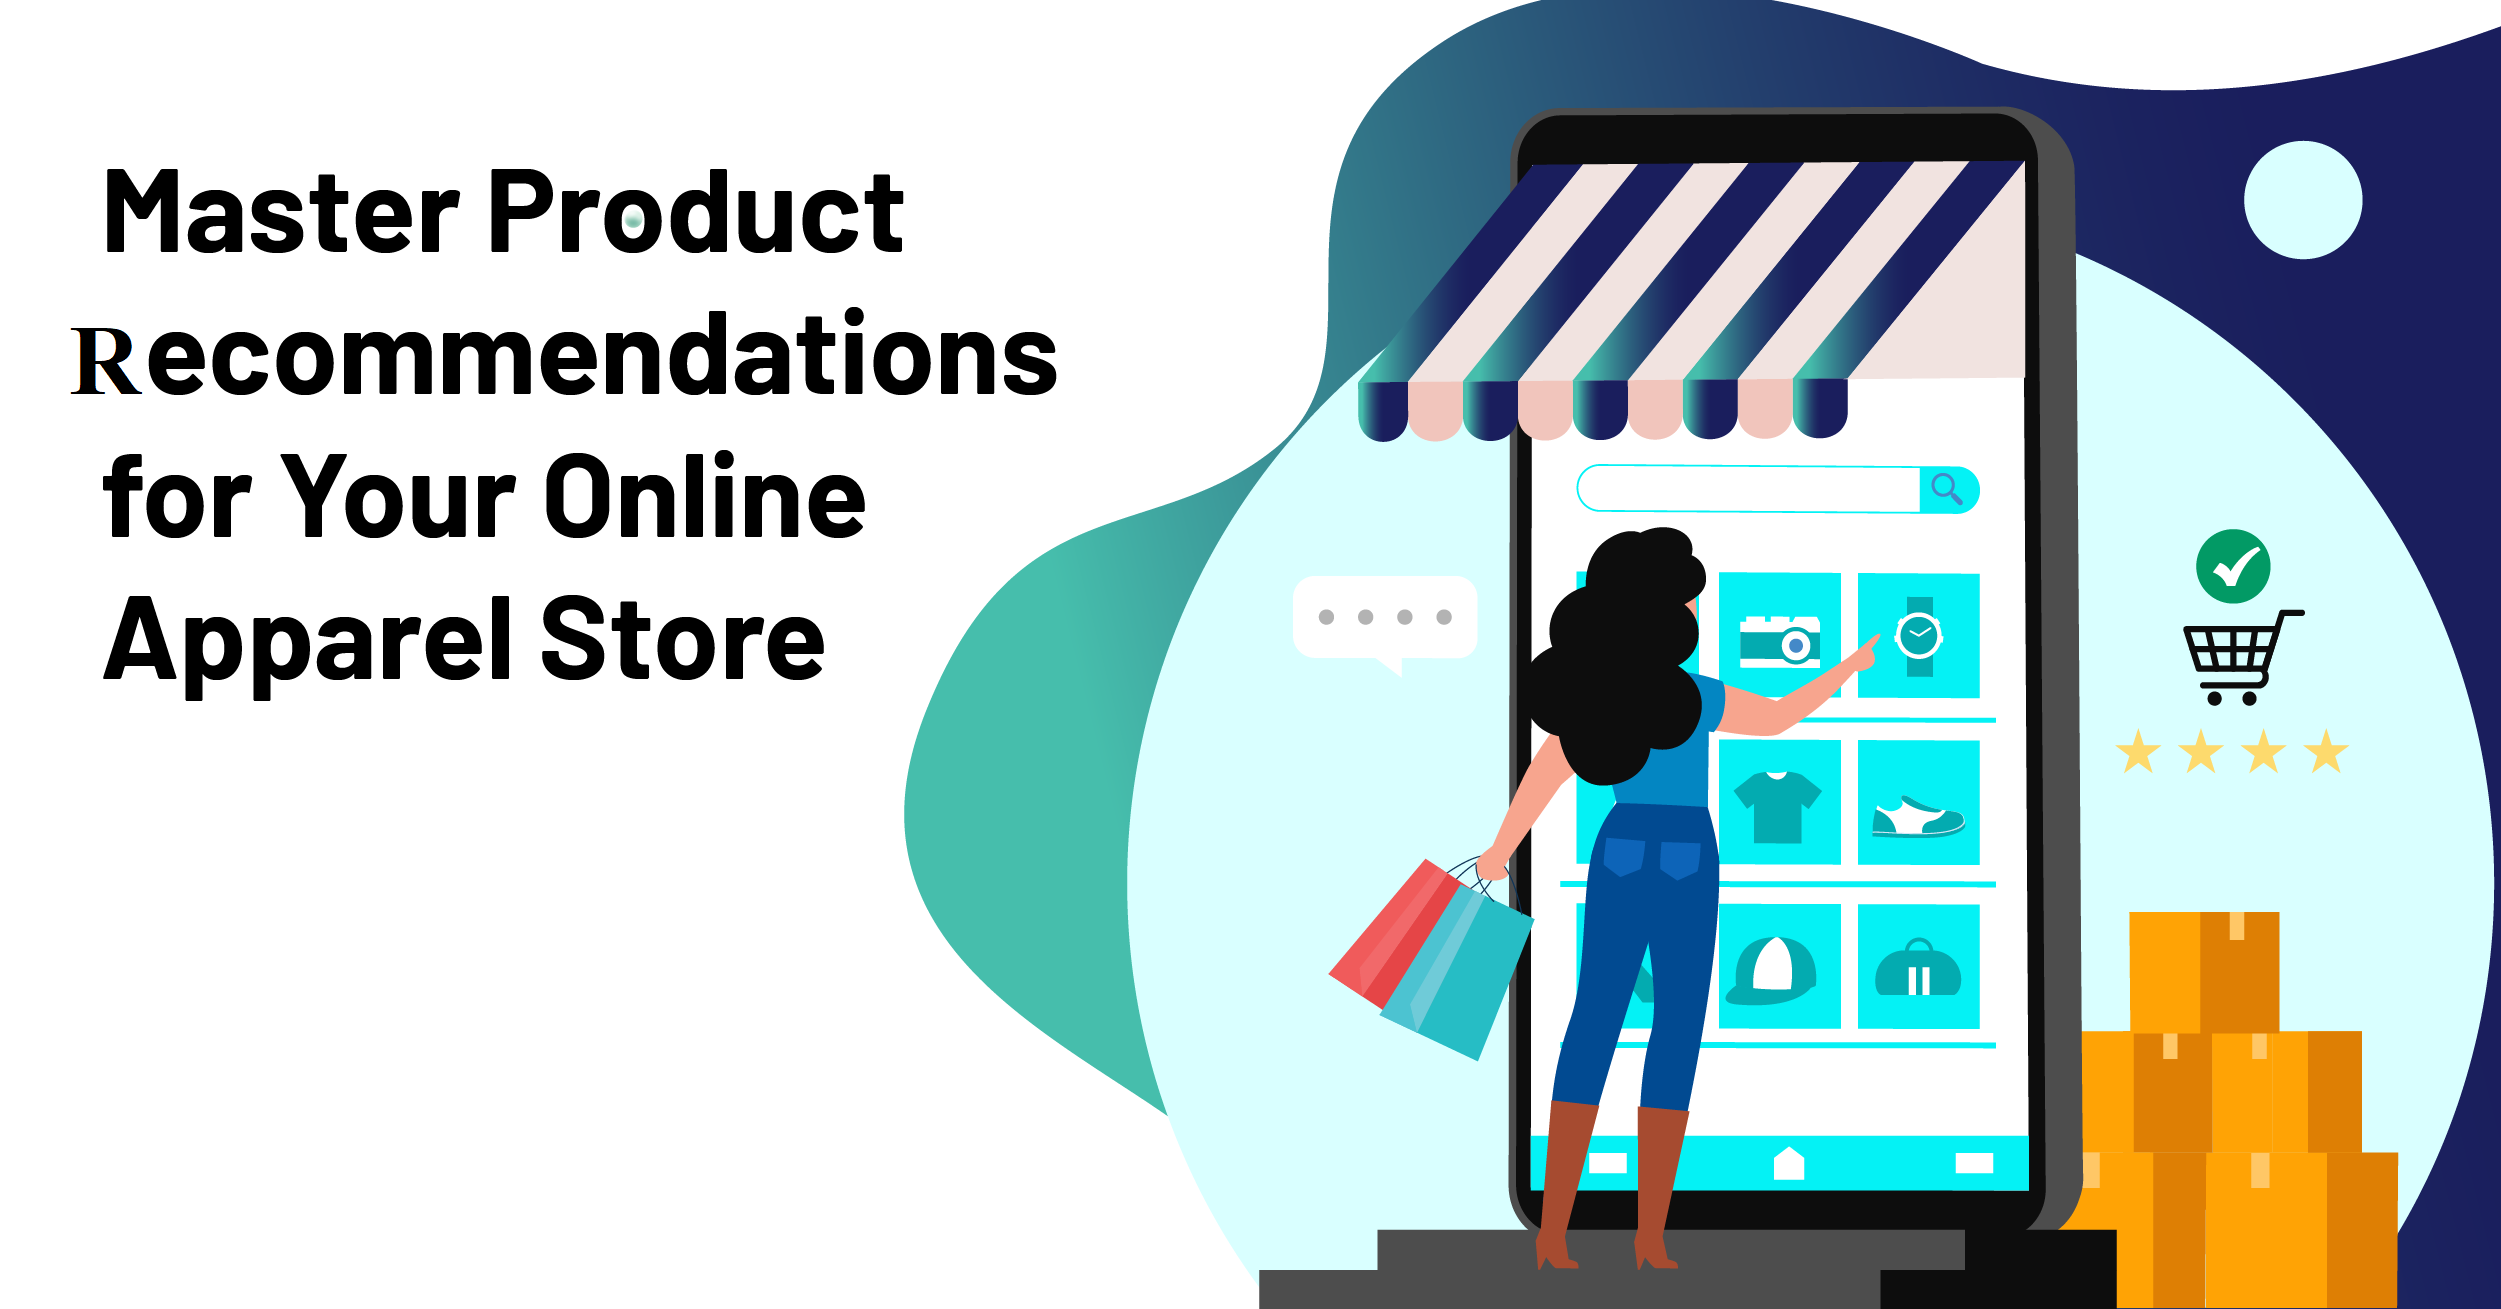 Product recommendations for Your Online Apparel Store